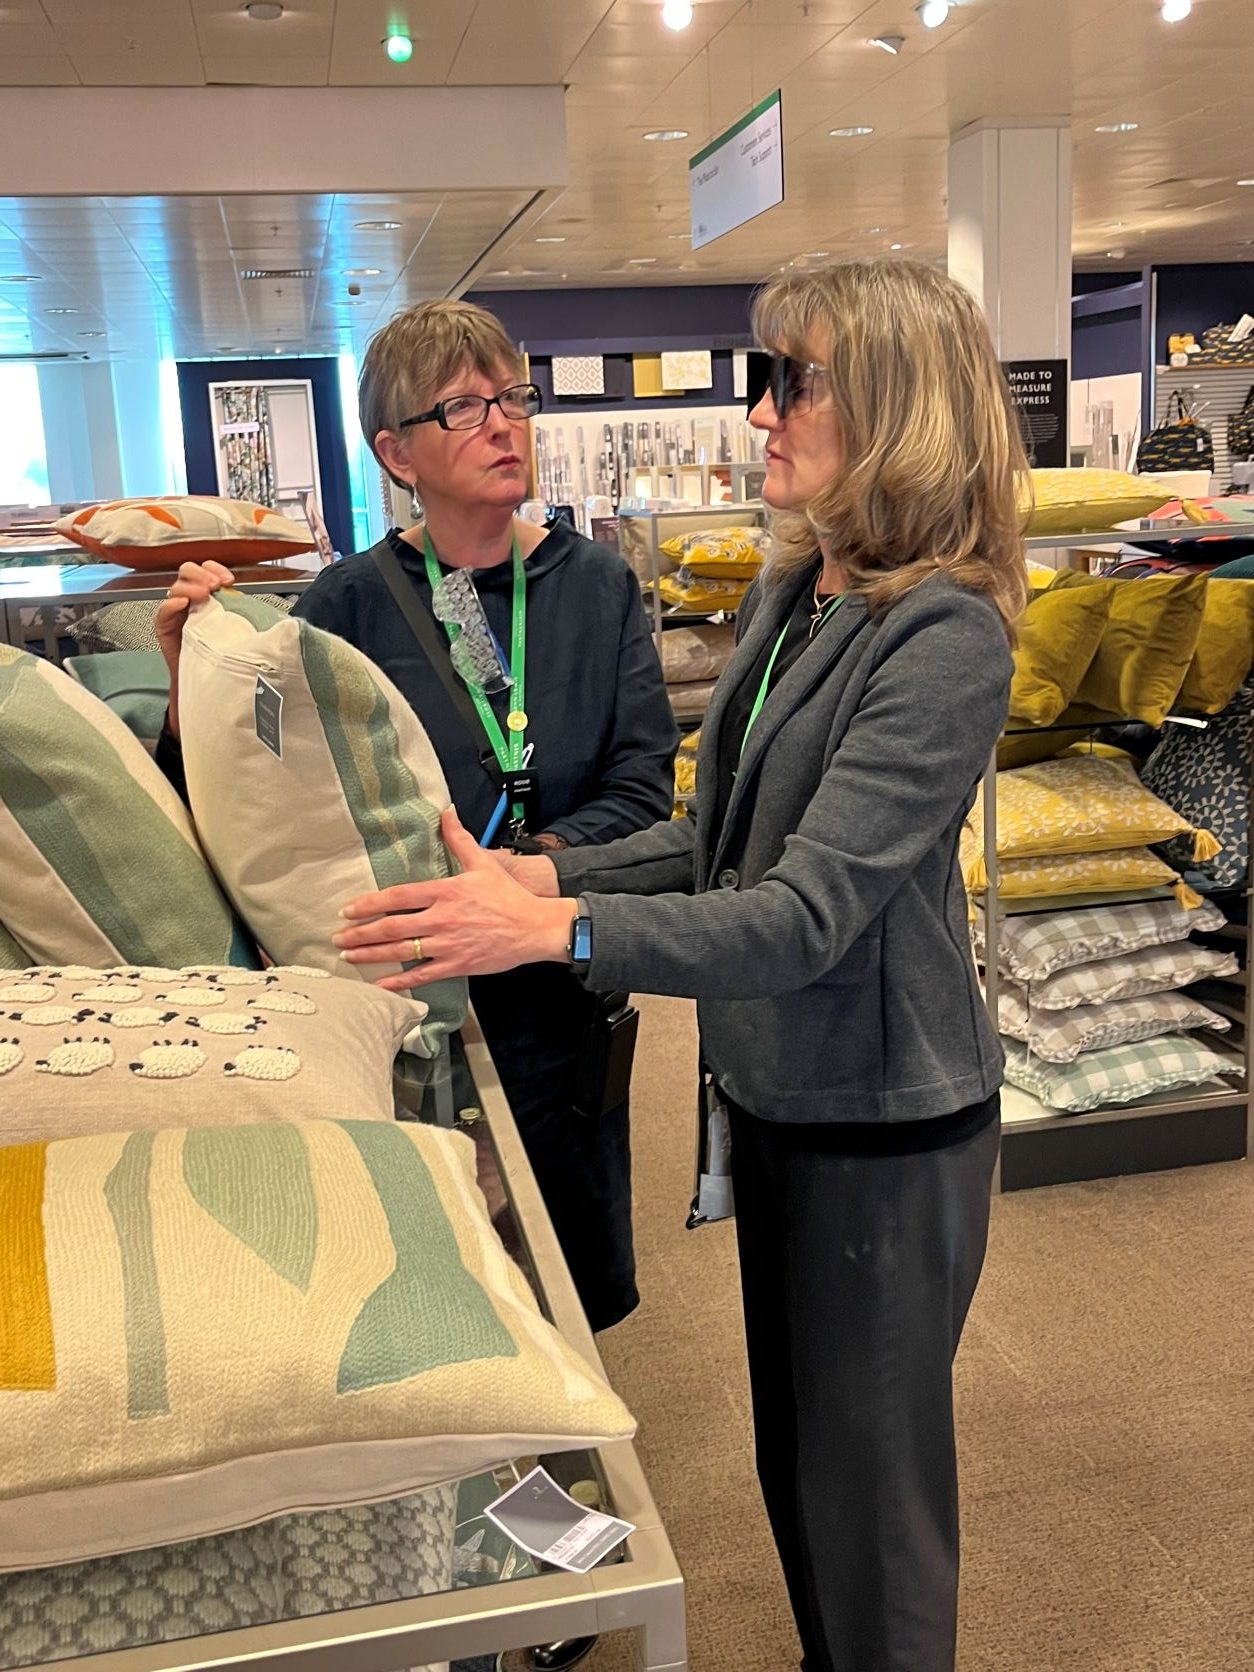 Two John Lewis staff members seen on the shop floor, looking at cushions. One staff member is wearing sim specs, the other is guiding.